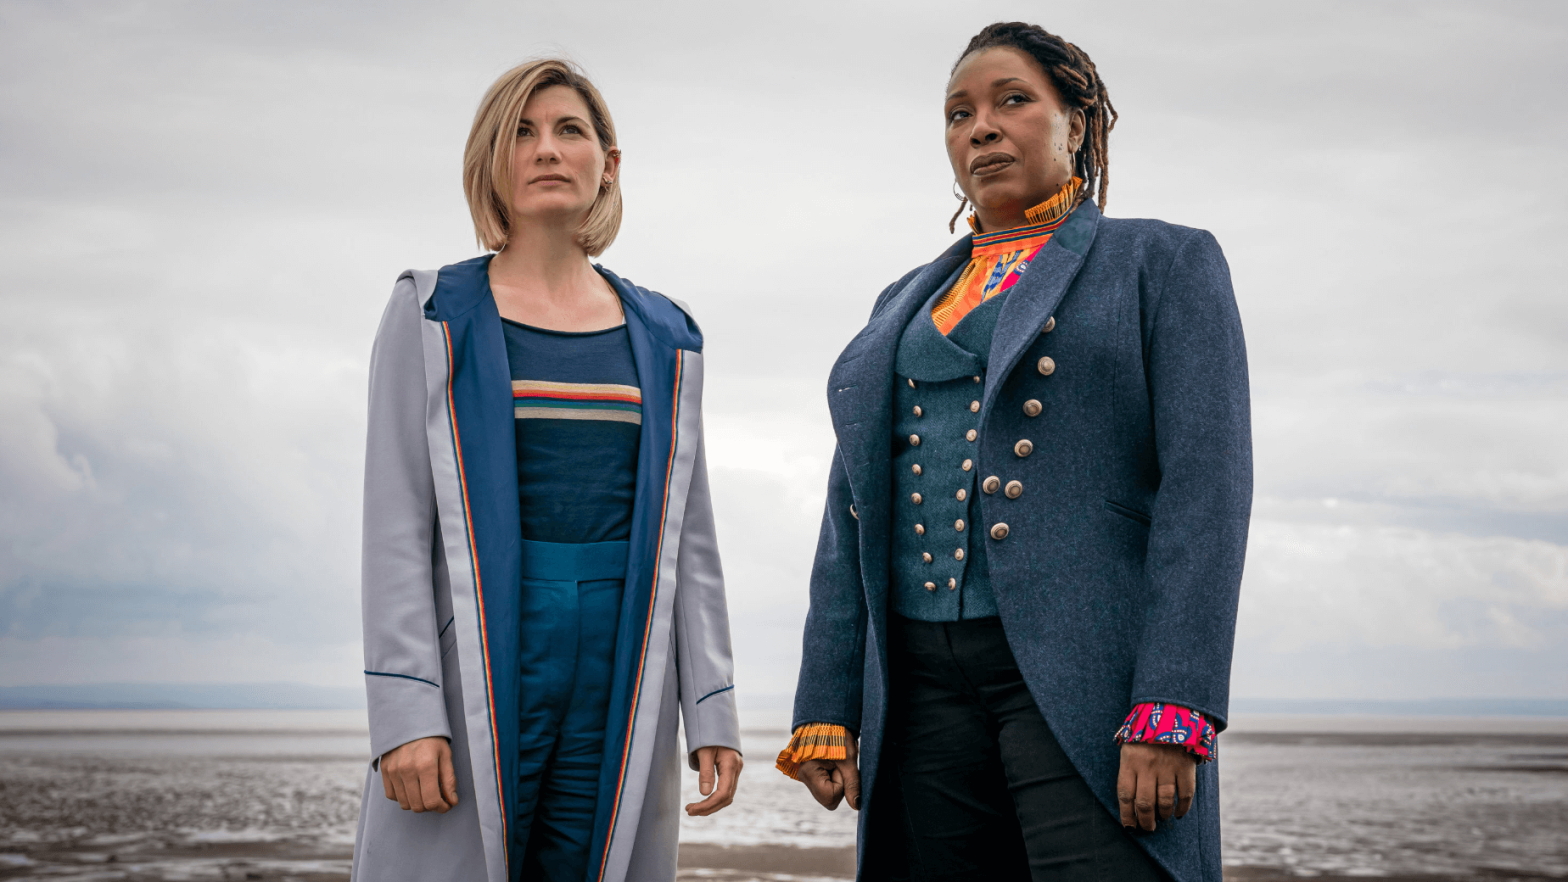 Jodie Whittaker and Jo Martin in season 12 of Doctor Who.  (Image: BBC)